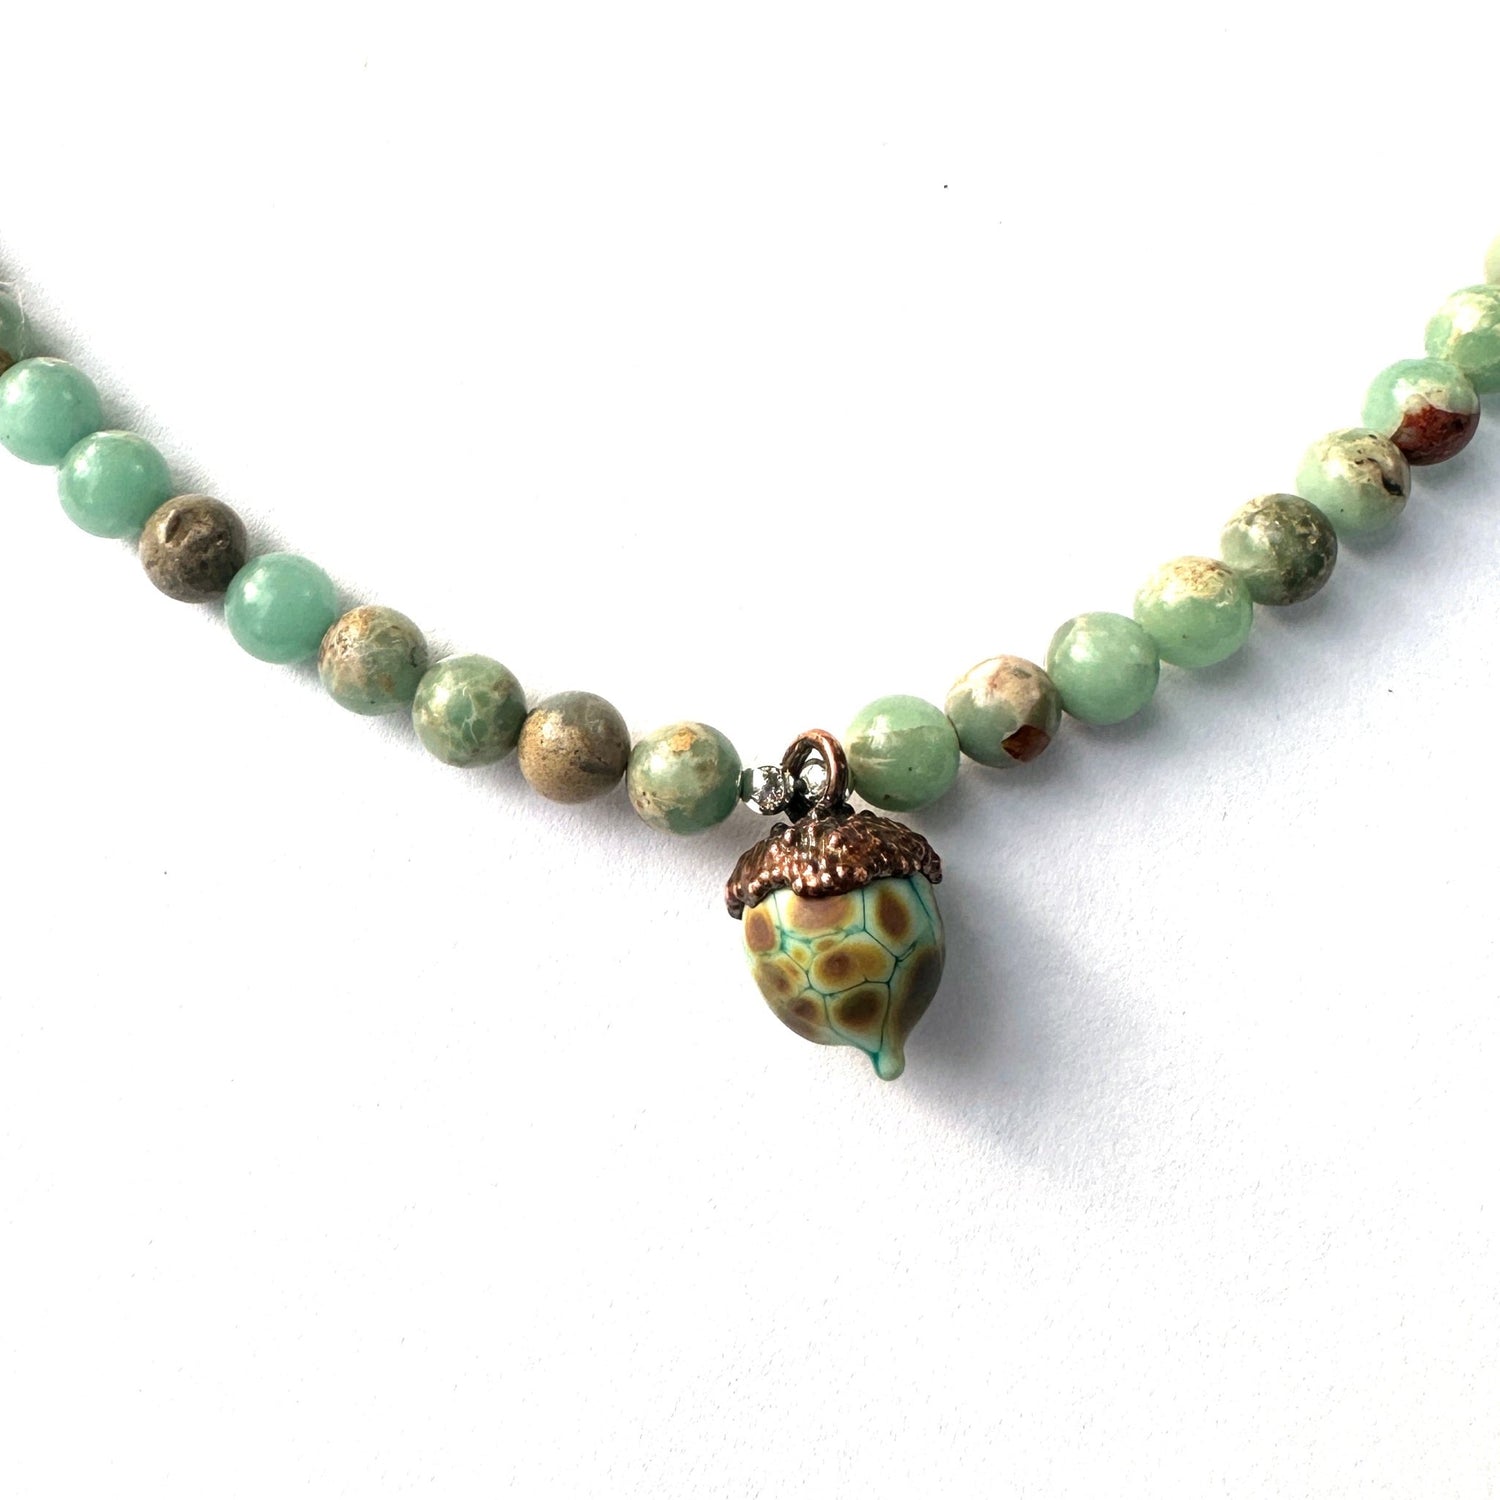 Acorn and Gemstone Necklace - The Glass Acorn